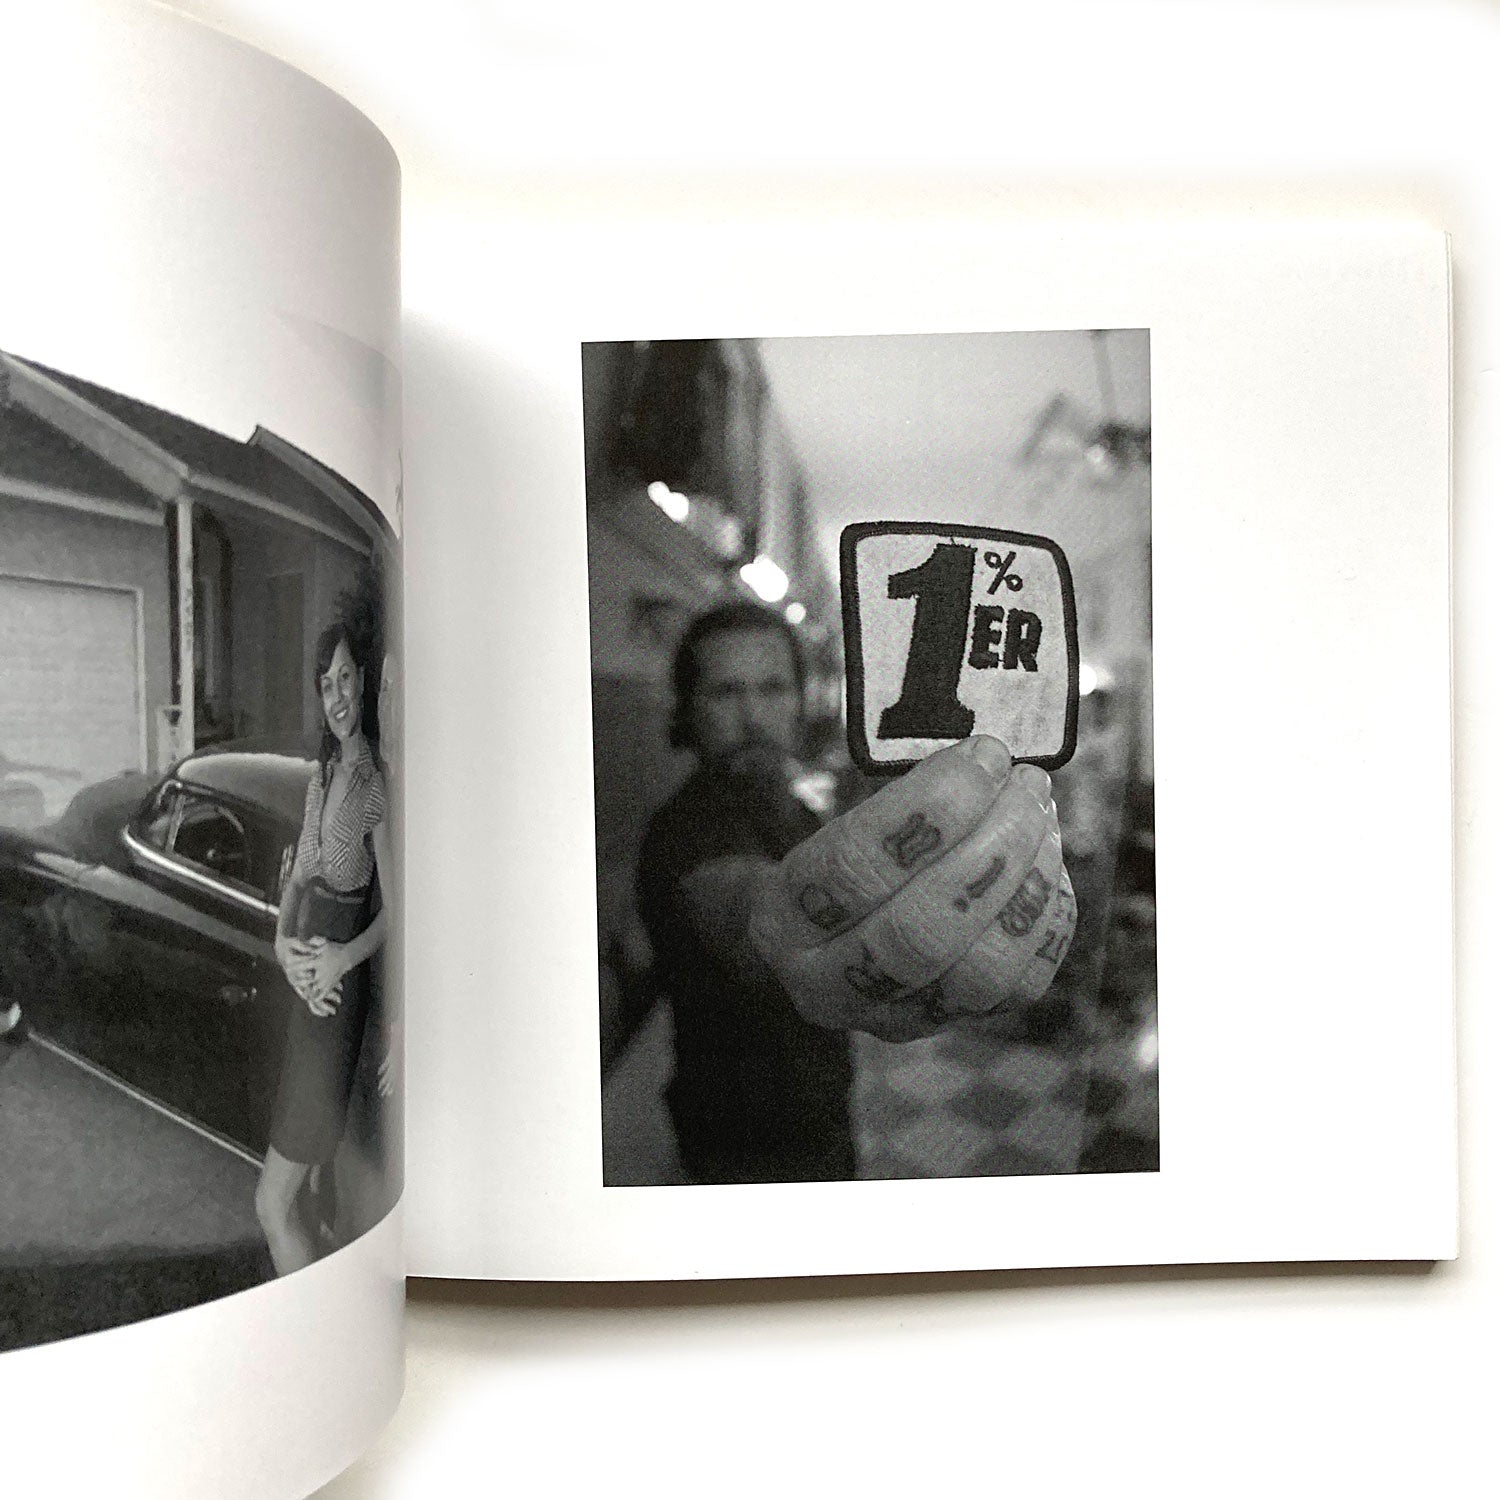 Photography compilation book-zine by Adam Wright